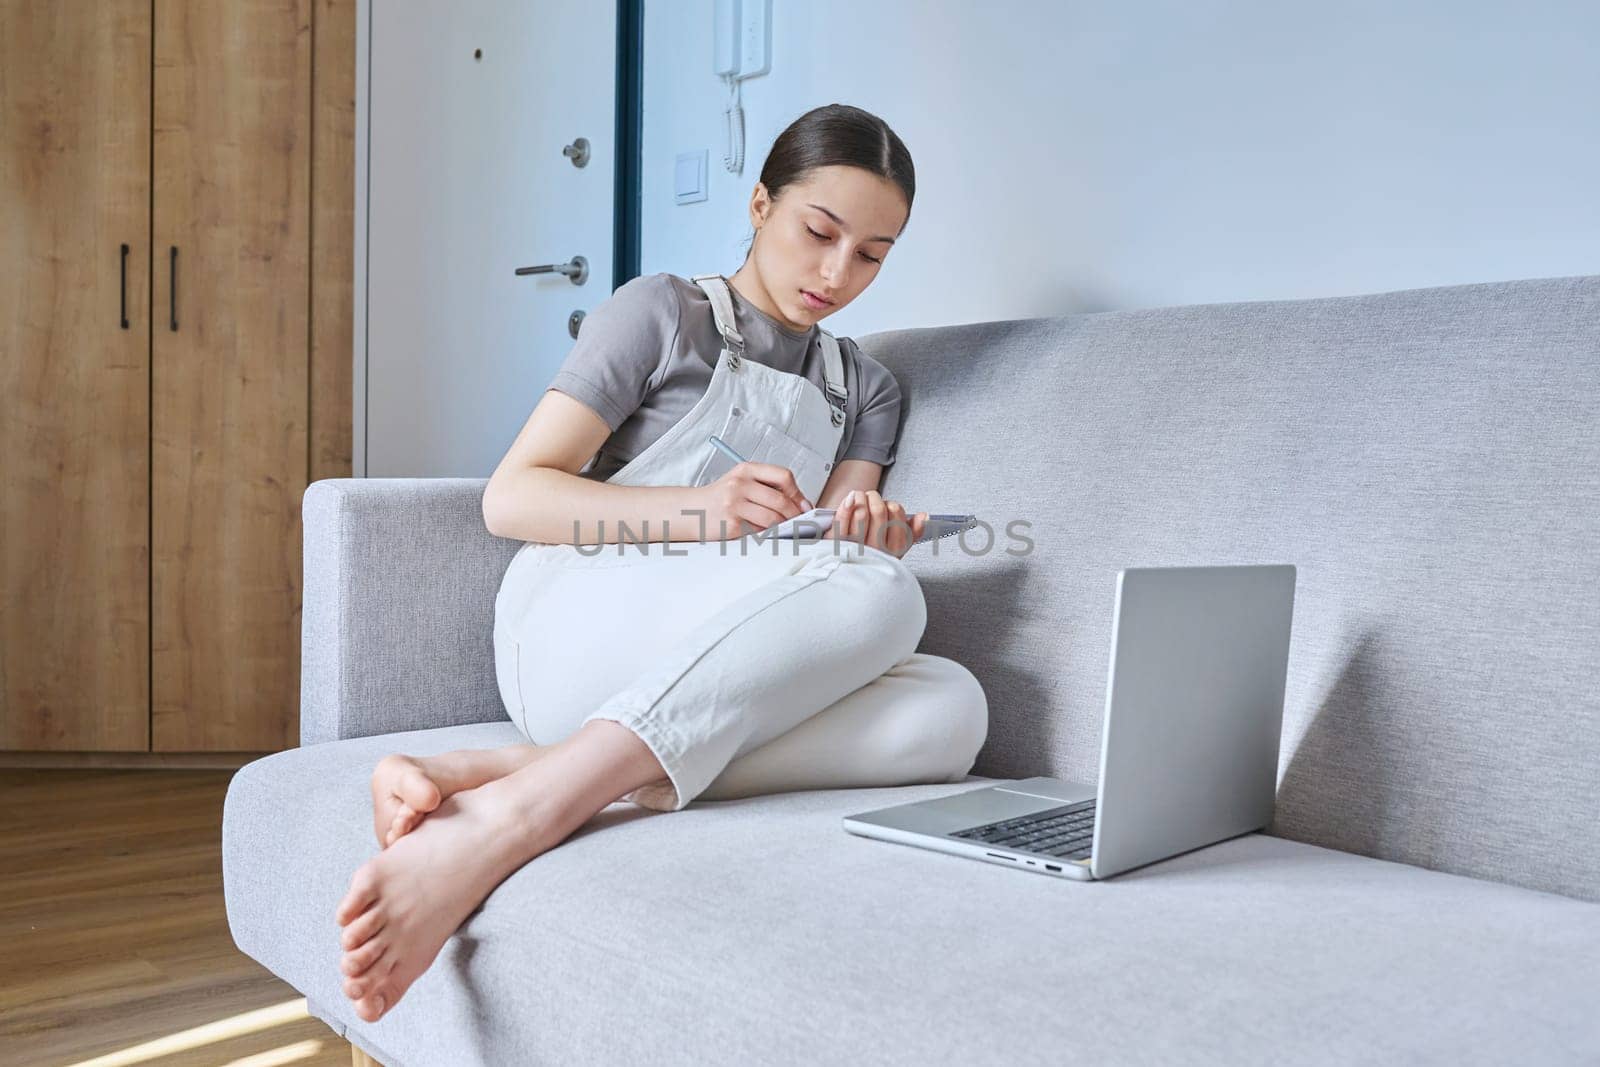 Teen girl at home on couch using laptop by VH-studio